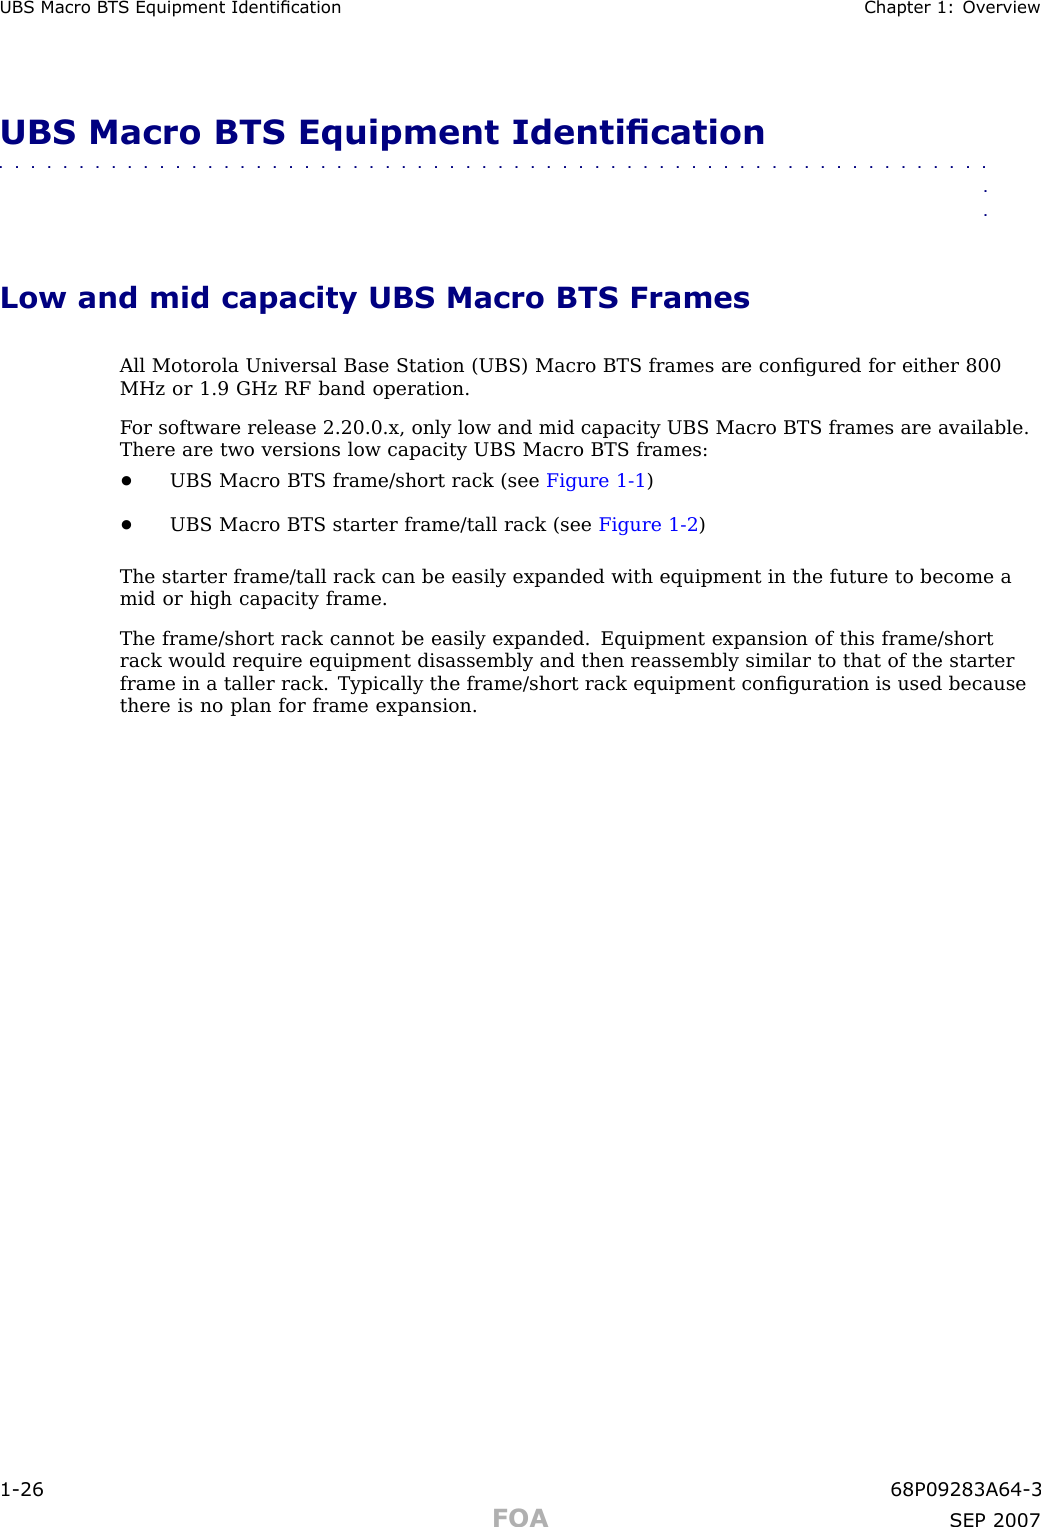 UBS Macro B T S Equipment Identication Chapter 1: Ov erviewUBS Macro BTS Equipment Identication■■■■■■■■■■■■■■■■■■■■■■■■■■■■■■■■■■■■■■■■■■■■■■■■■■■■■■■■■■■■■■■■Low and mid capacity UBS Macro BTS FramesAll Motorola Universal Base Station (UBS) Macro BTS frames are conﬁgured for either 800MHz or 1.9 GHz RF band operation.F or software release 2.20.0.x, only low and mid capacity UBS Macro BTS frames are available.There are two versions low capacity UBS Macro BTS frames:•UBS Macro BTS frame/short rack (see Figure 1 -1 )•UBS Macro BTS starter frame/tall rack (see Figure 1 -2 )The starter frame/tall rack can be easily expanded with equipment in the future to become amid or high capacity frame.The frame/short rack cannot be easily expanded. Equipment expansion of this frame/shortrack would require equipment disassembly and then reassembly similar to that of the starterframe in a taller rack. Typically the frame/short rack equipment conﬁguration is used becausethere is no plan for frame expansion.1 -26 68P09283A64 -3FOA SEP 2007